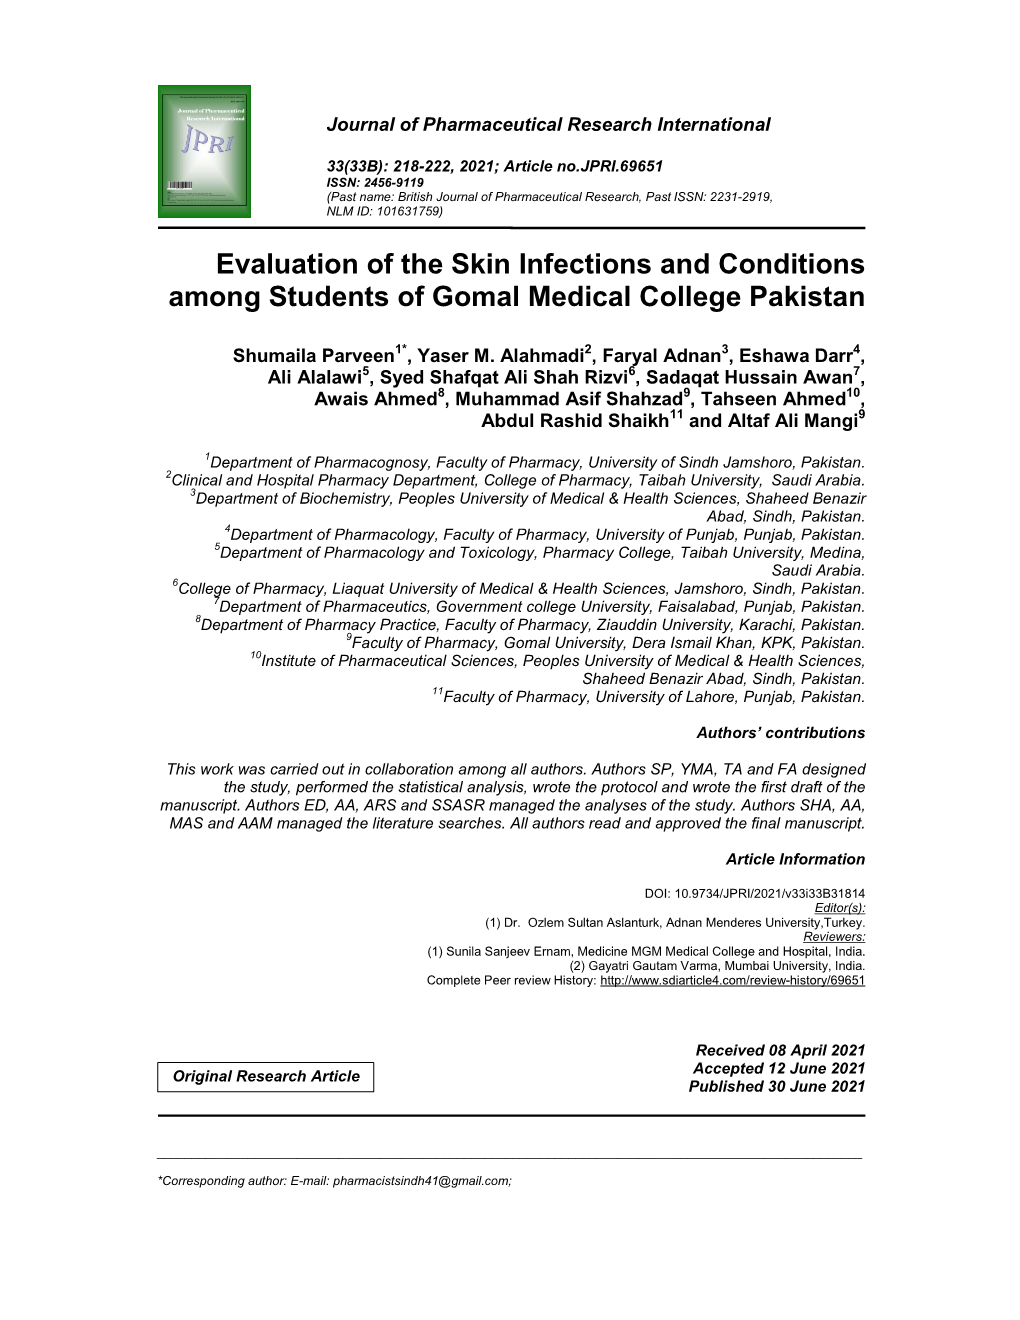 Evaluation of the Skin Infections and Conditions Among Students of Gomal Medical College Pakistan